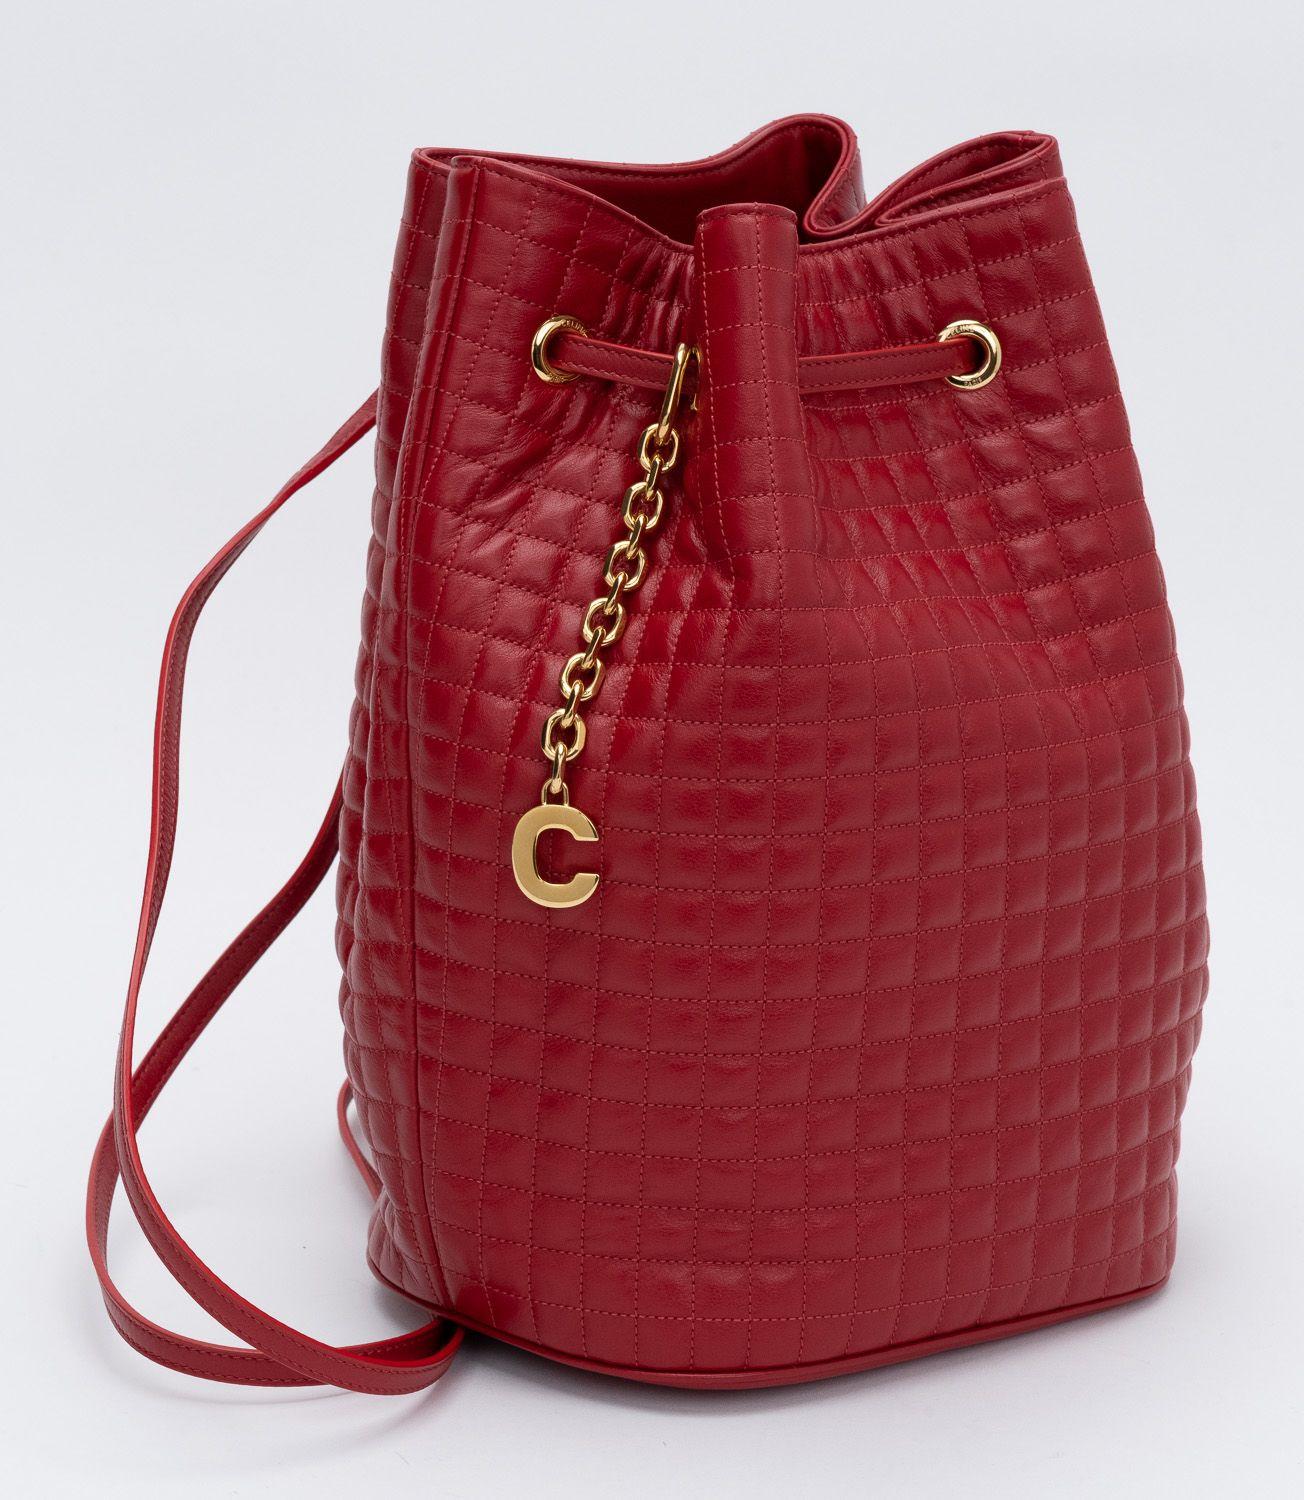 Celine Brand New  Red Quilted Leather Backpack, Gold metal hardware.
Red fabric lining inside.
Comes with generic dust cover and tag.